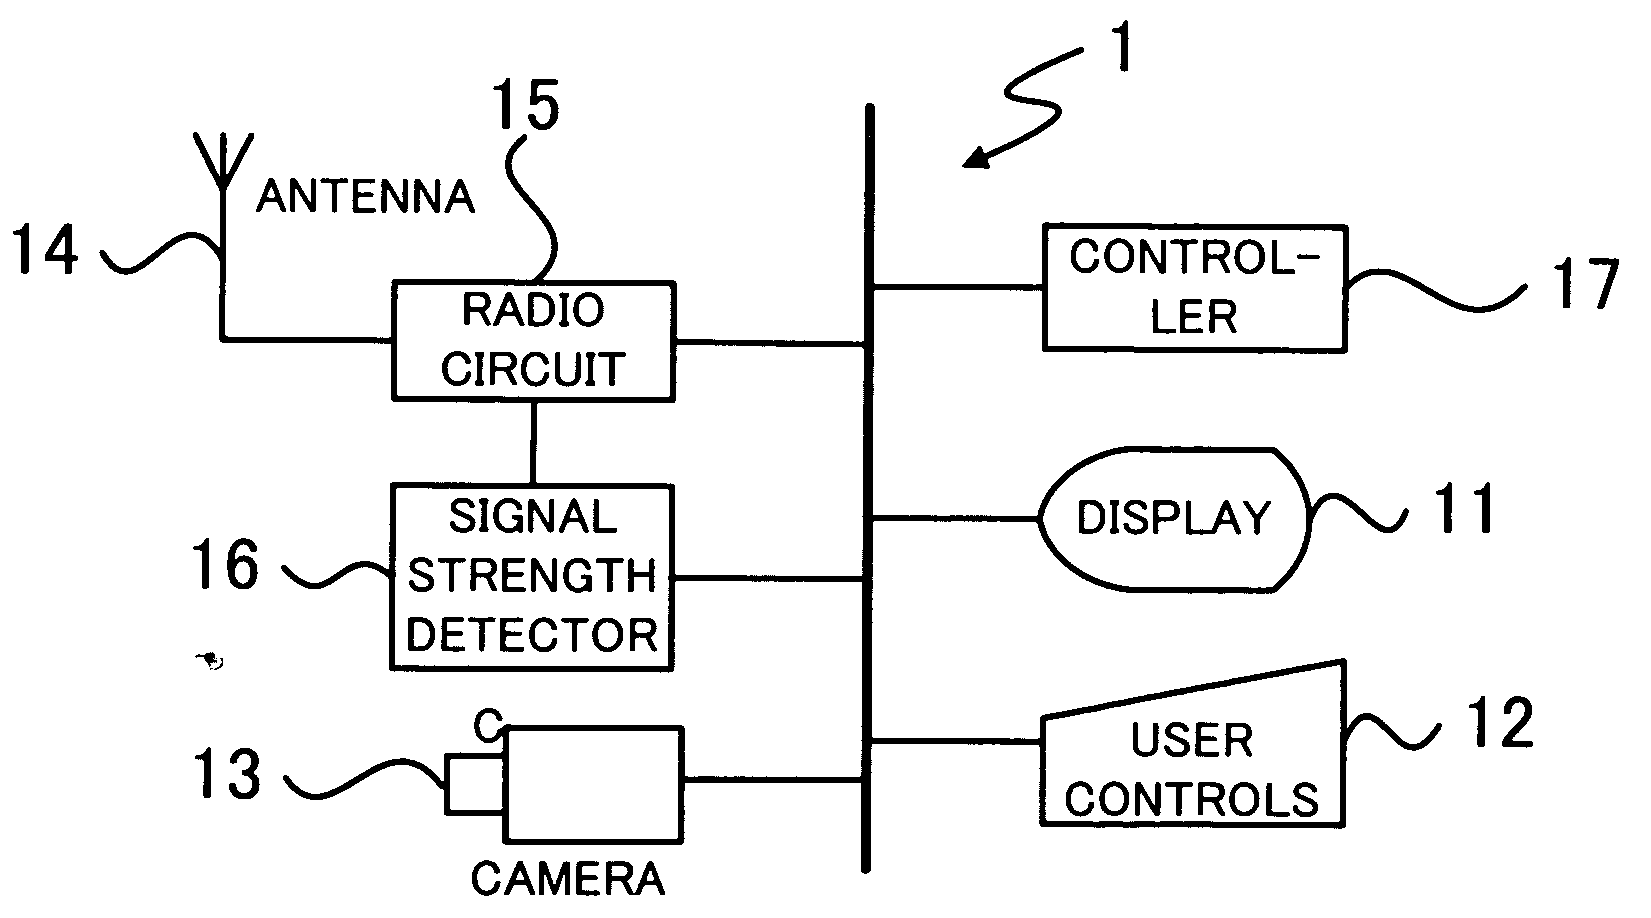 Apparatus and method for searching for base station of radio communication network